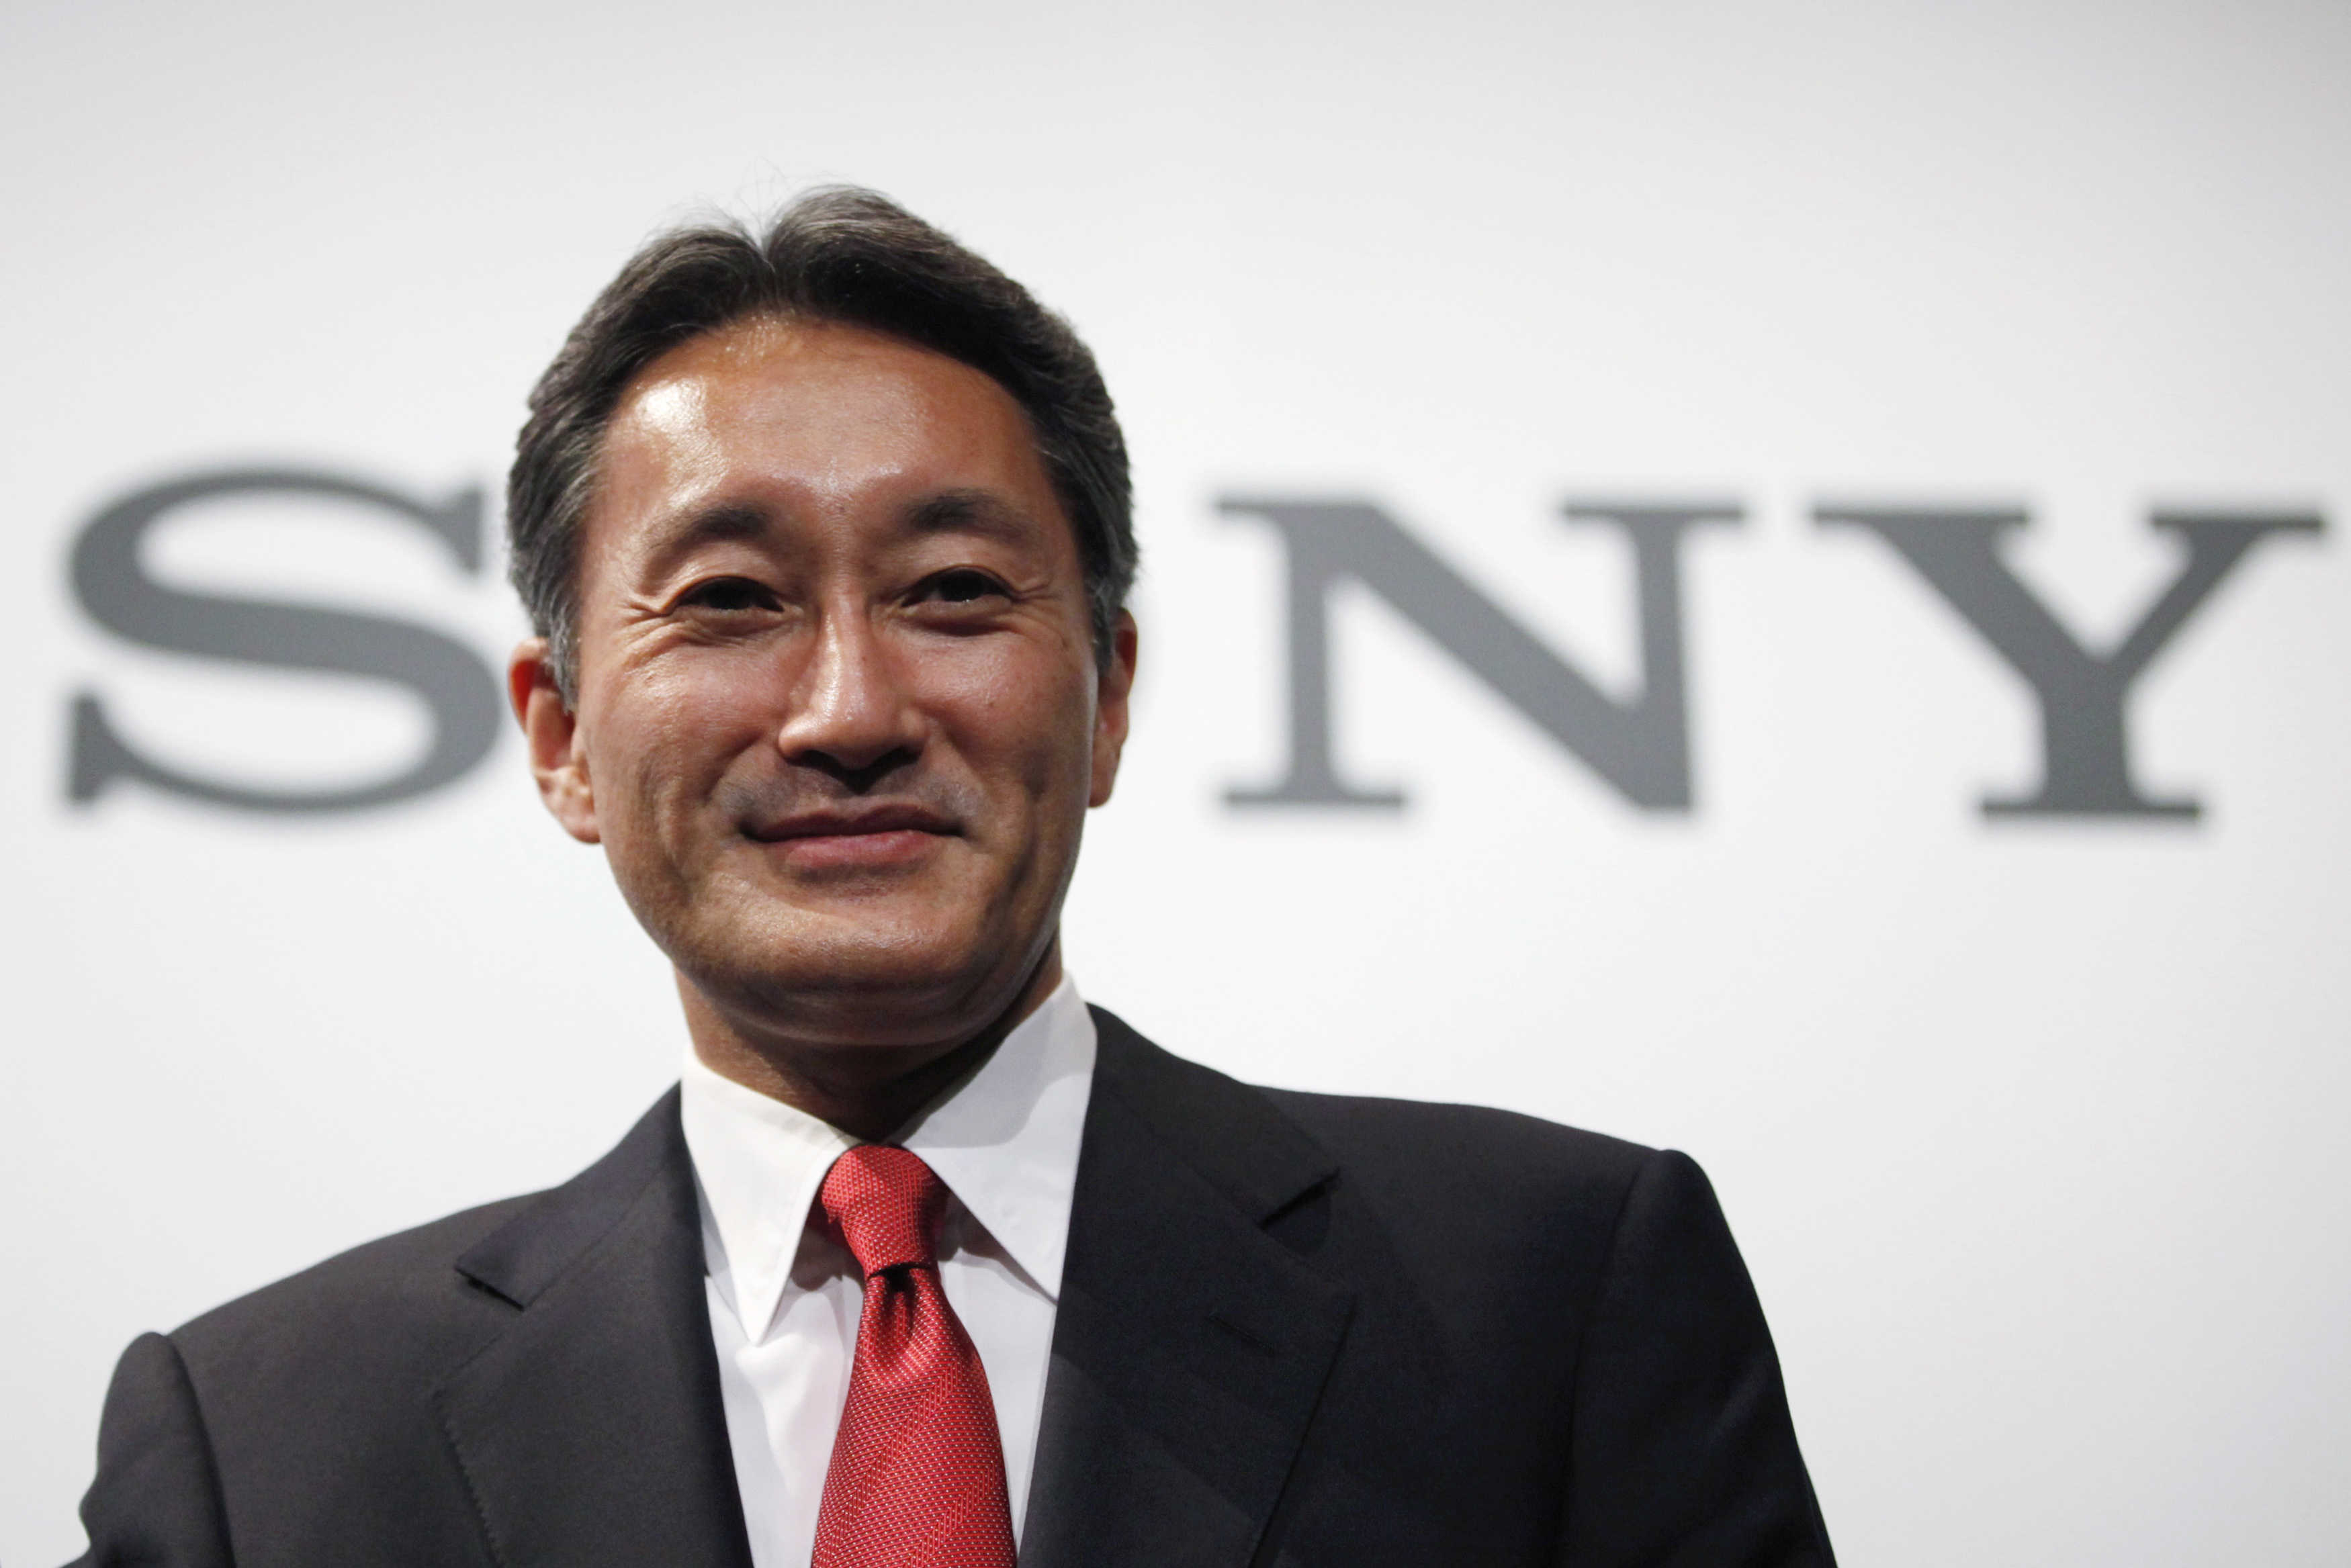 Sony Corp's Chief Executive Officer Hirai attends a news conference at the company's headquarters in Tokyo